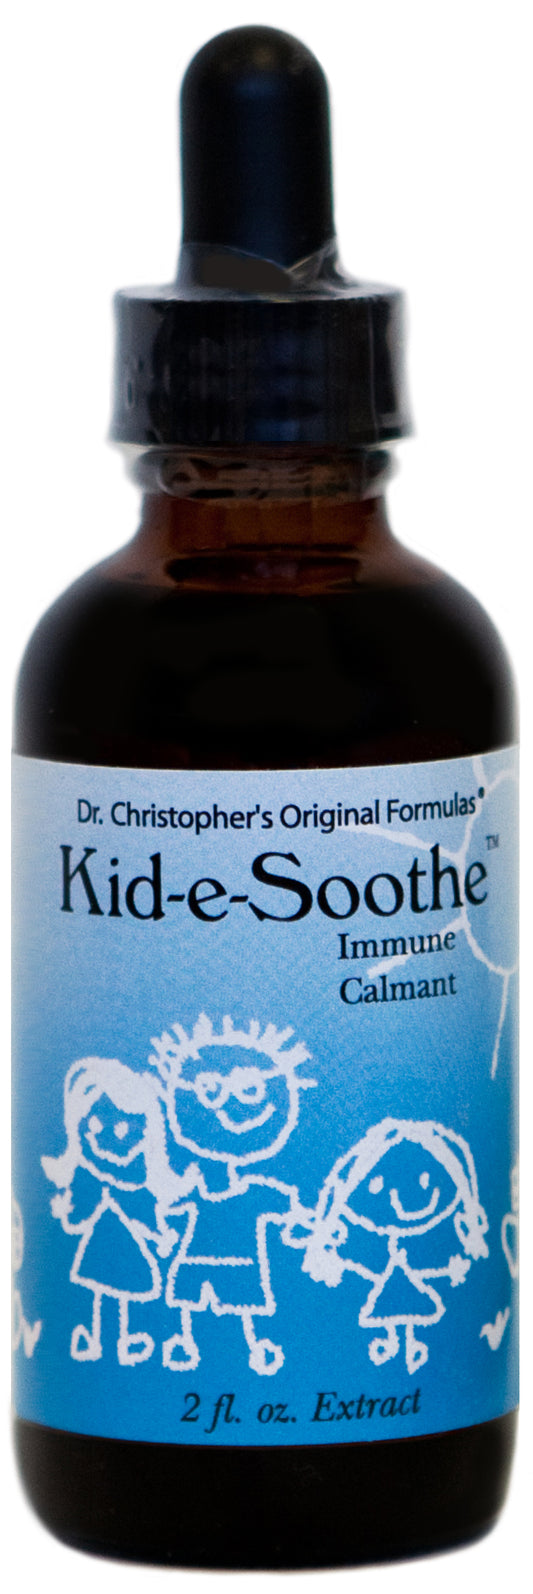 Dr. Christopher's Kid-e-Soothe Extract